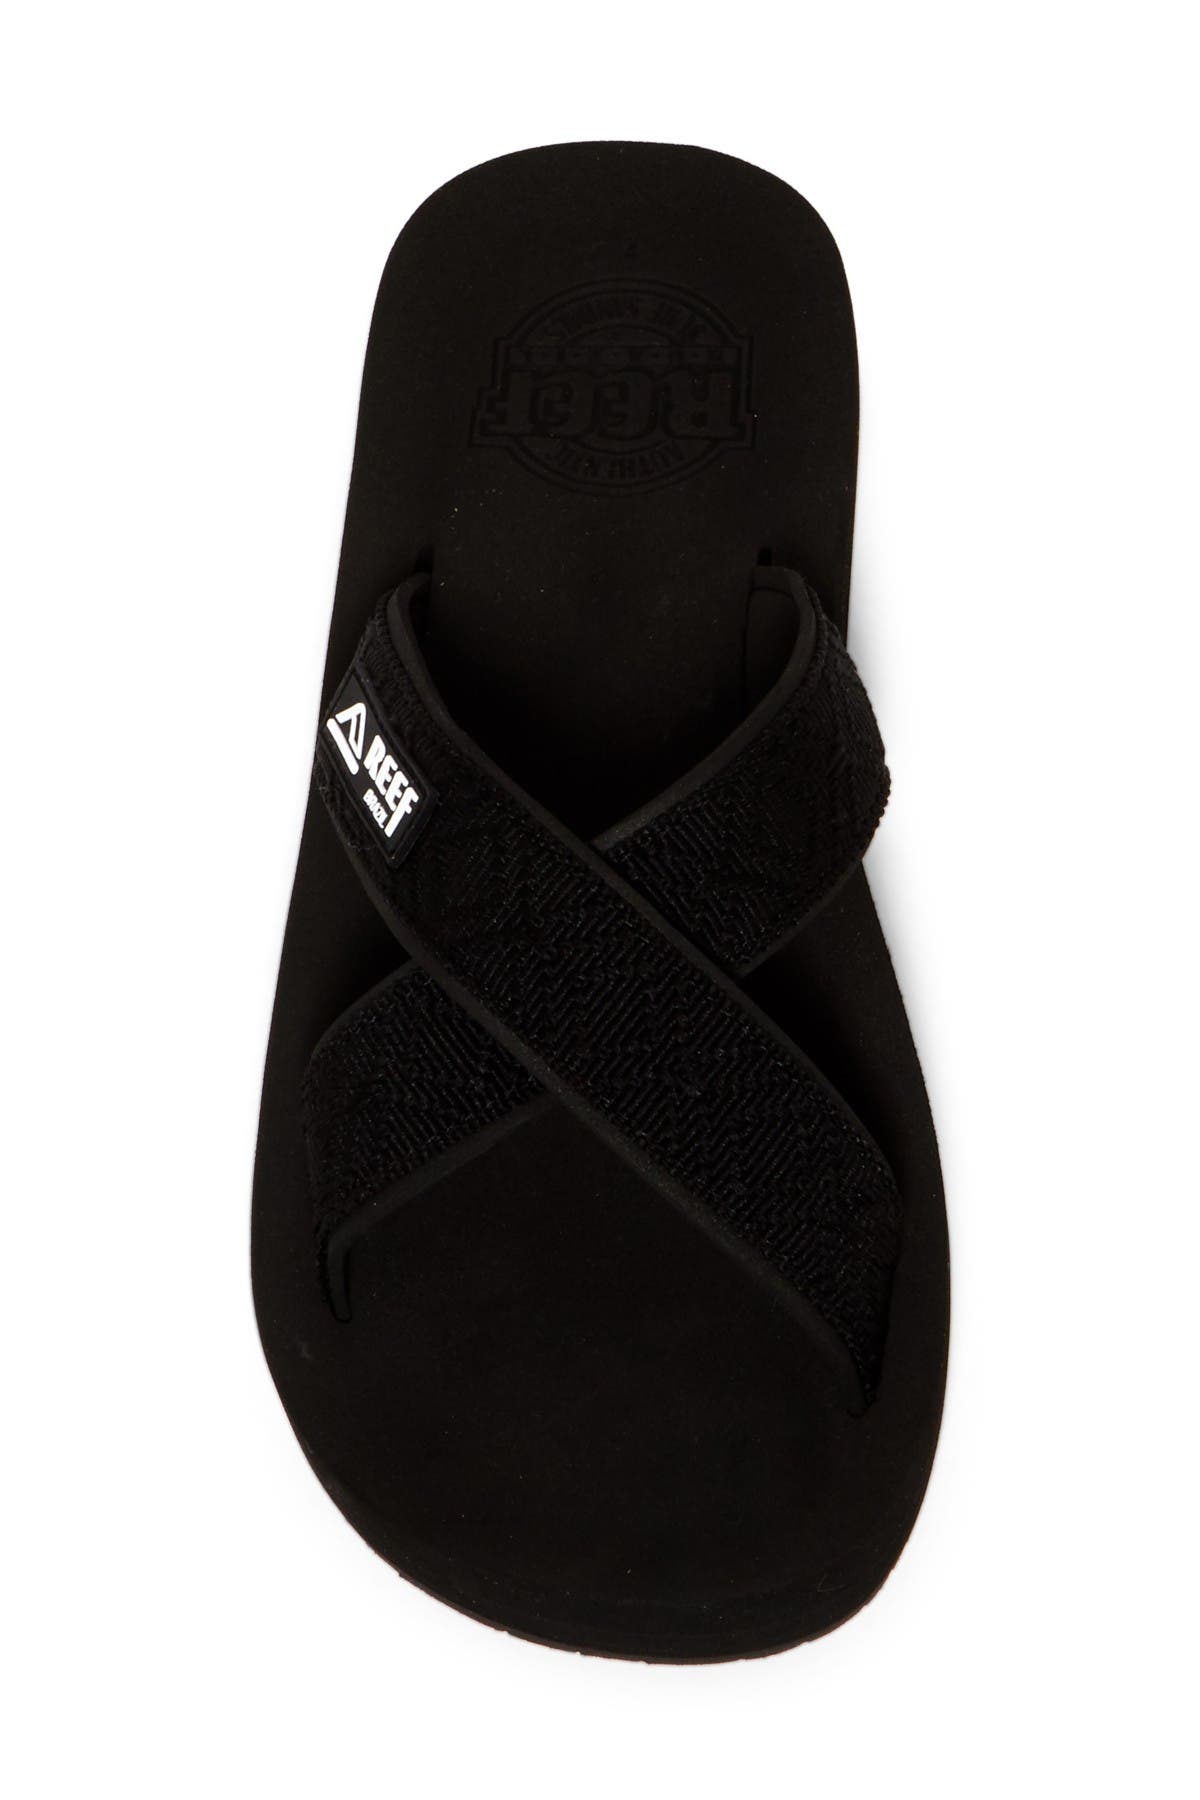 reef crossover sandals